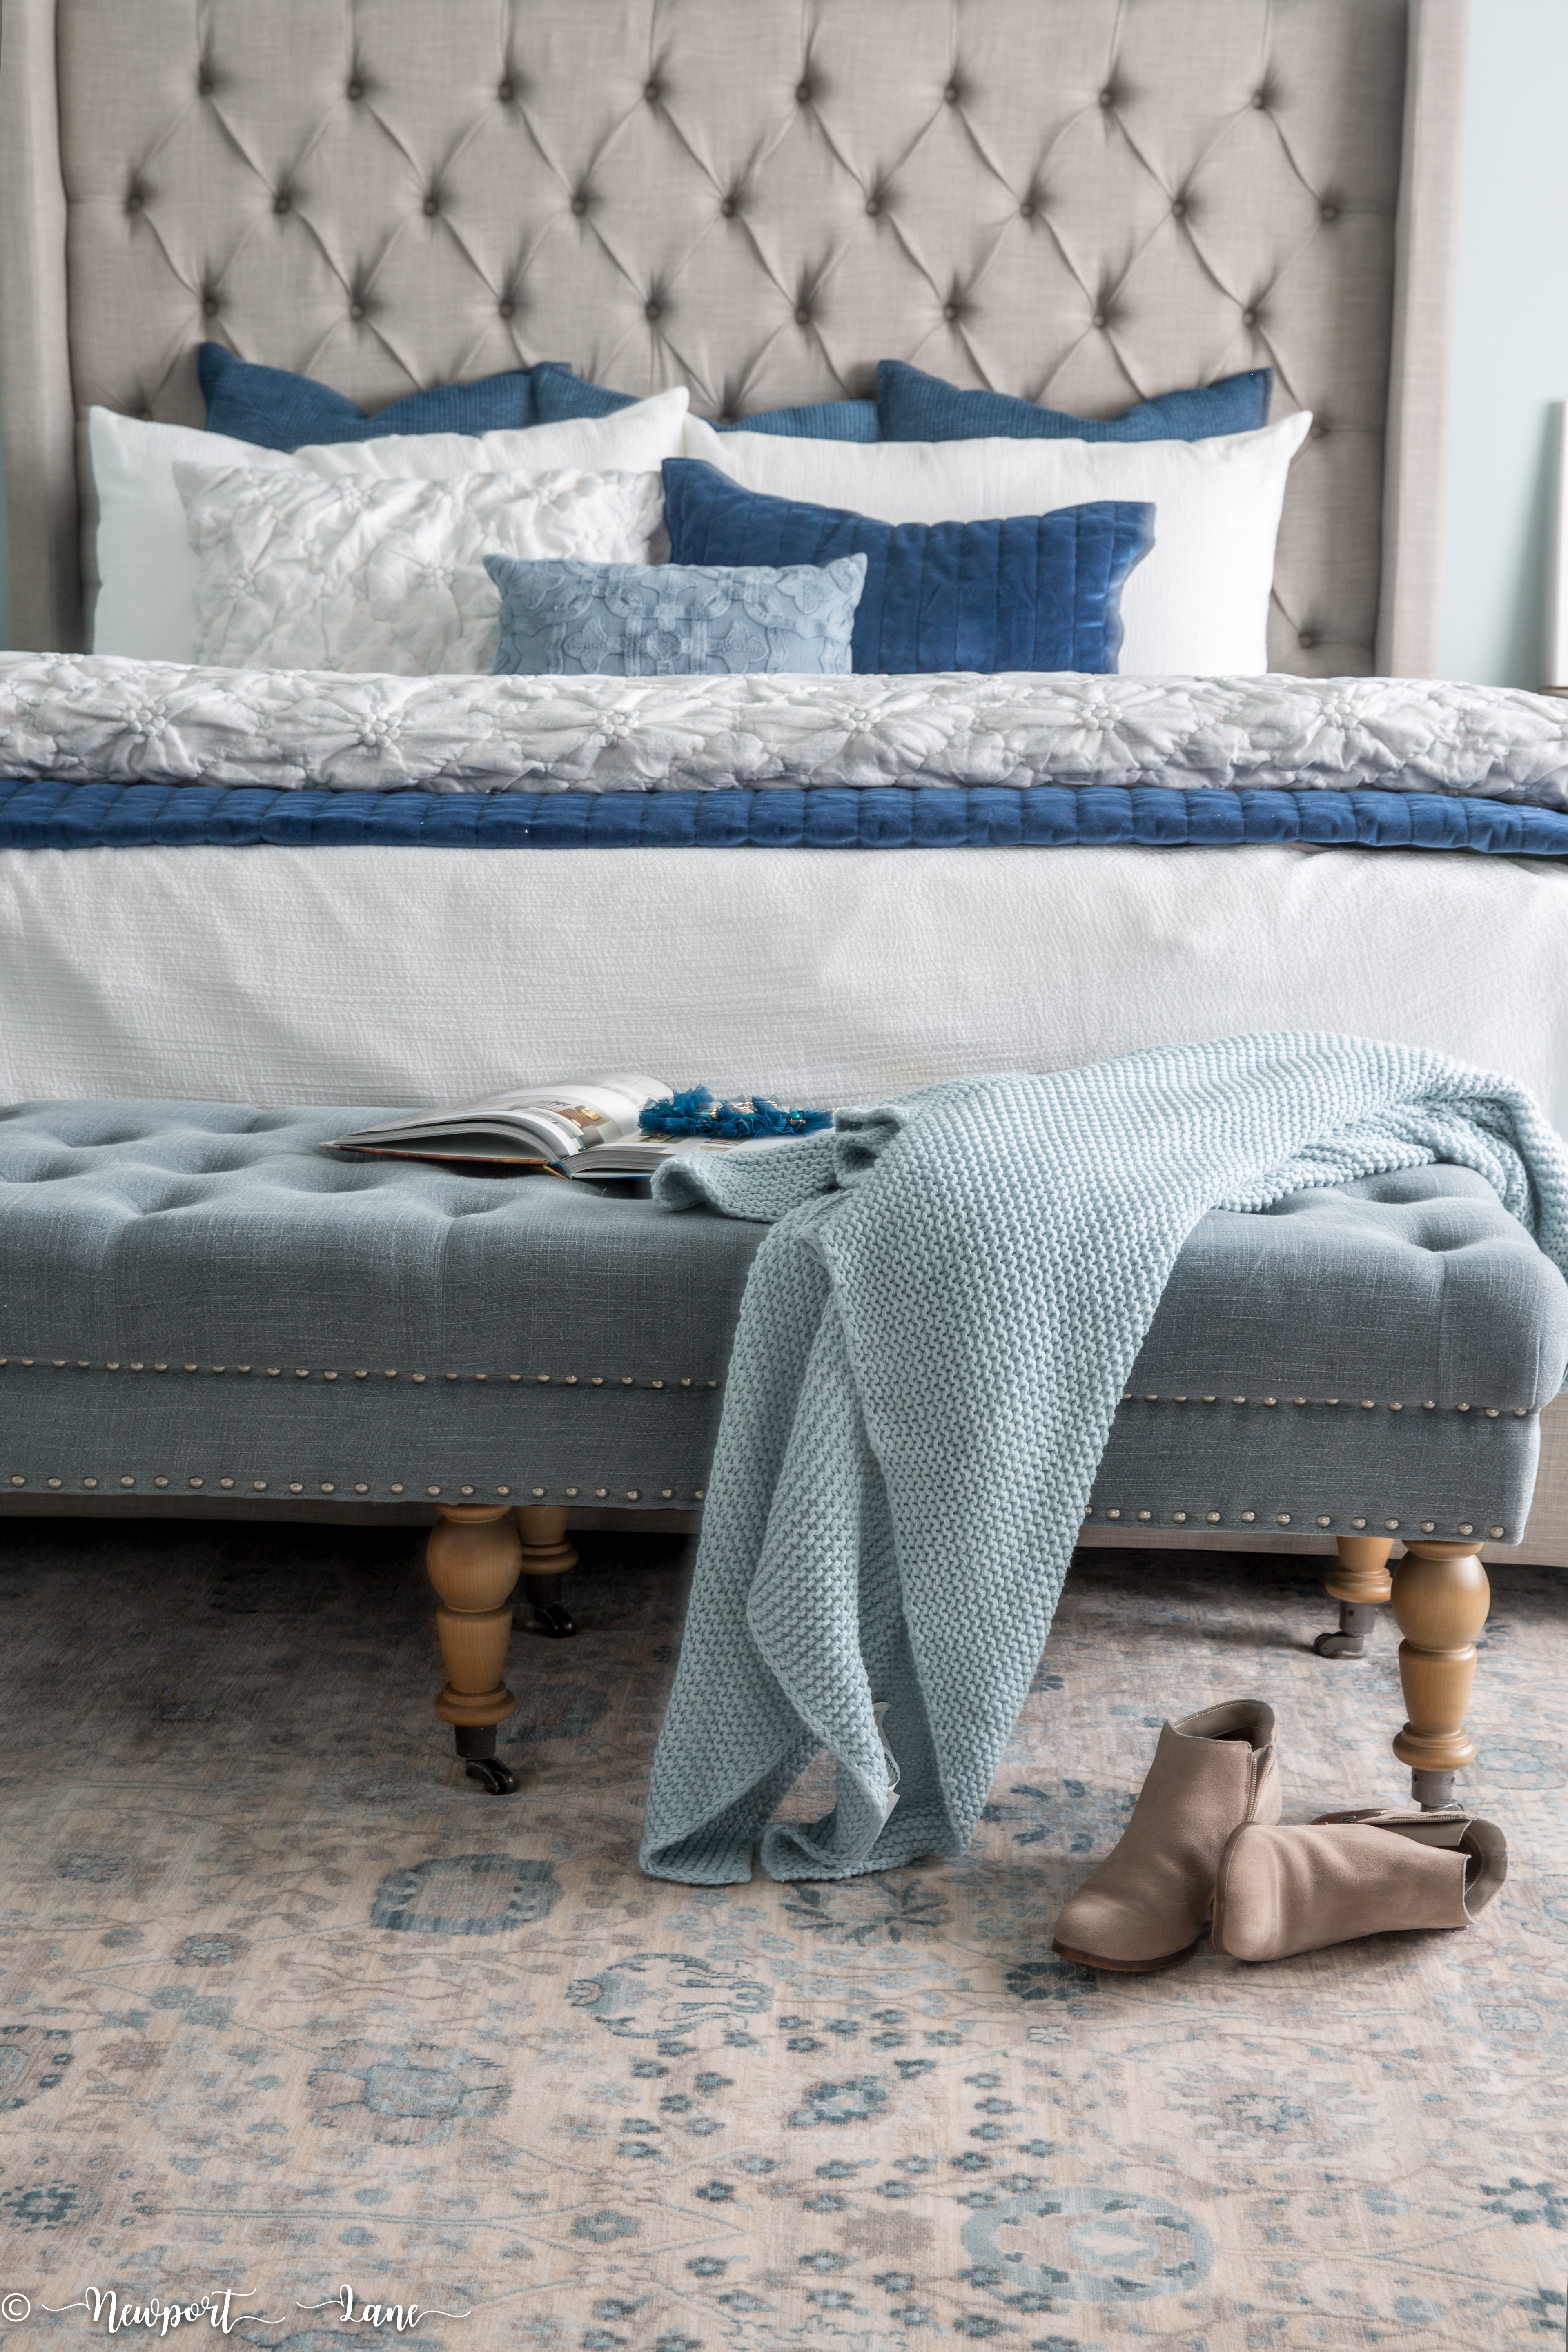 Our California Coastal Bedroom Makeover is full of soothing blue and whites and coastal touches